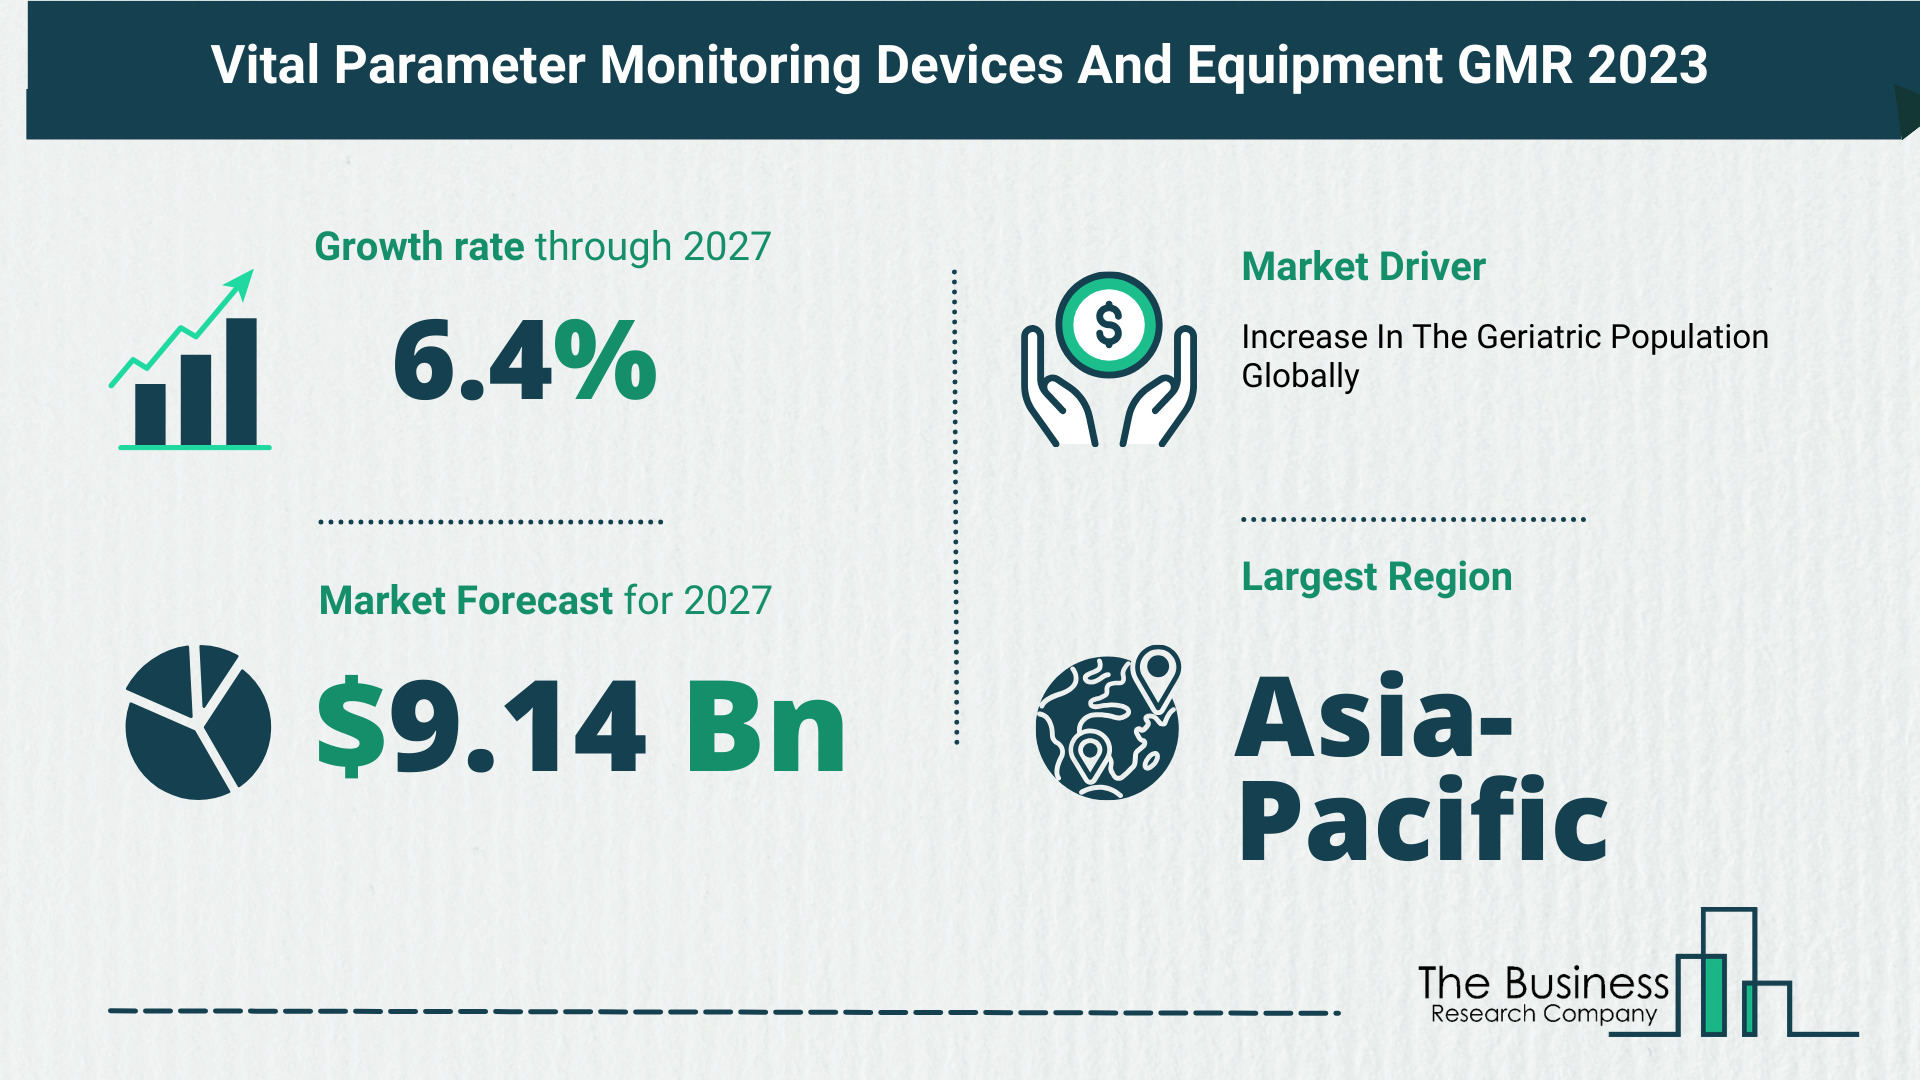 Vital Parameter Monitoring Devices And Equipment Market Size